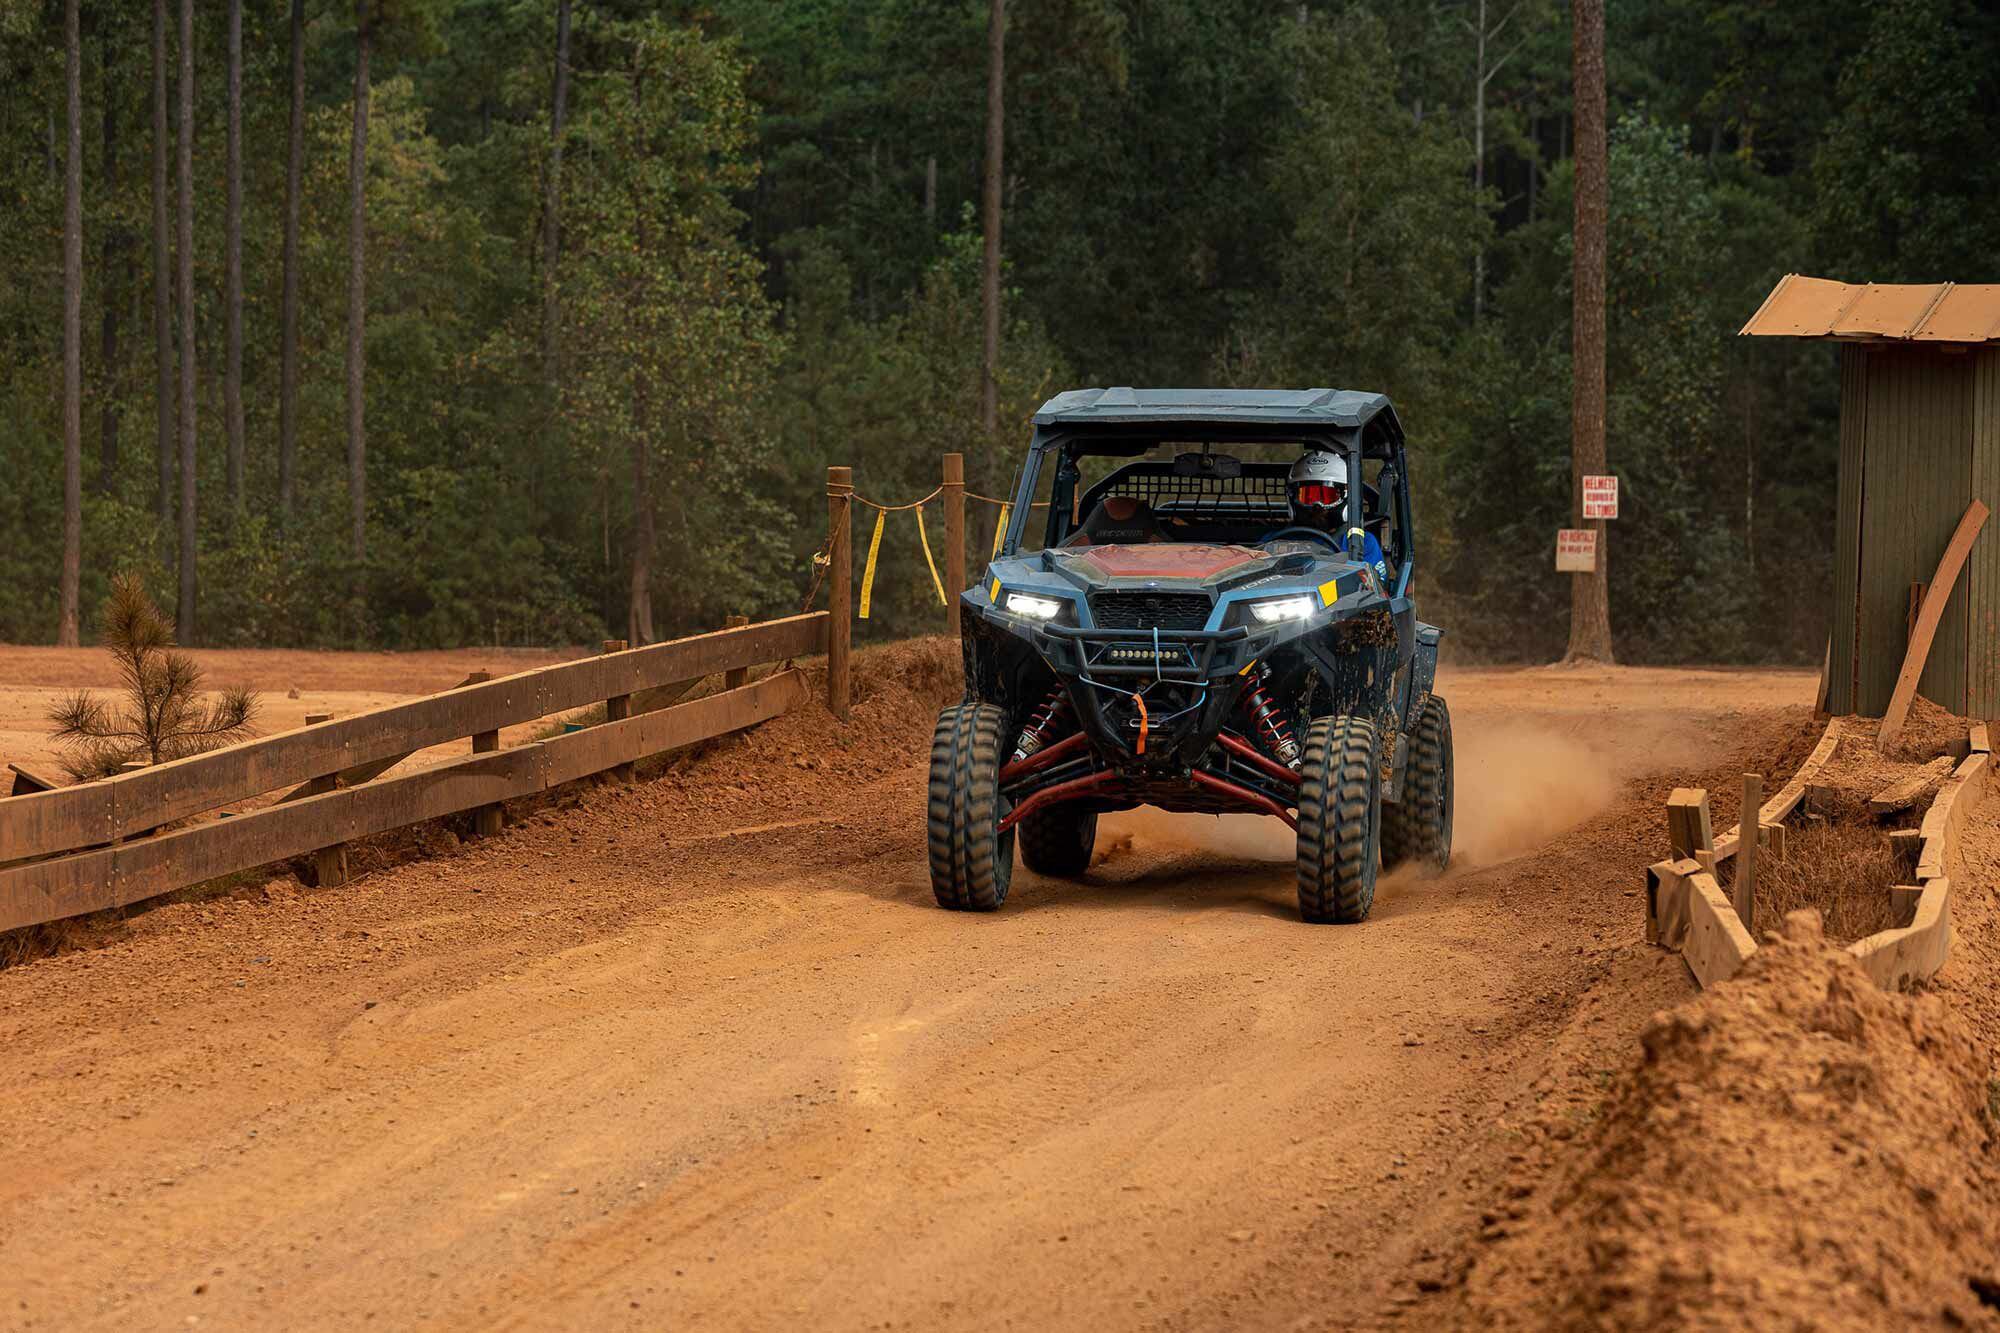 Even when stacked up next to the much quicker Polaris RZR Trail S, the General held its own on the dragstrip.